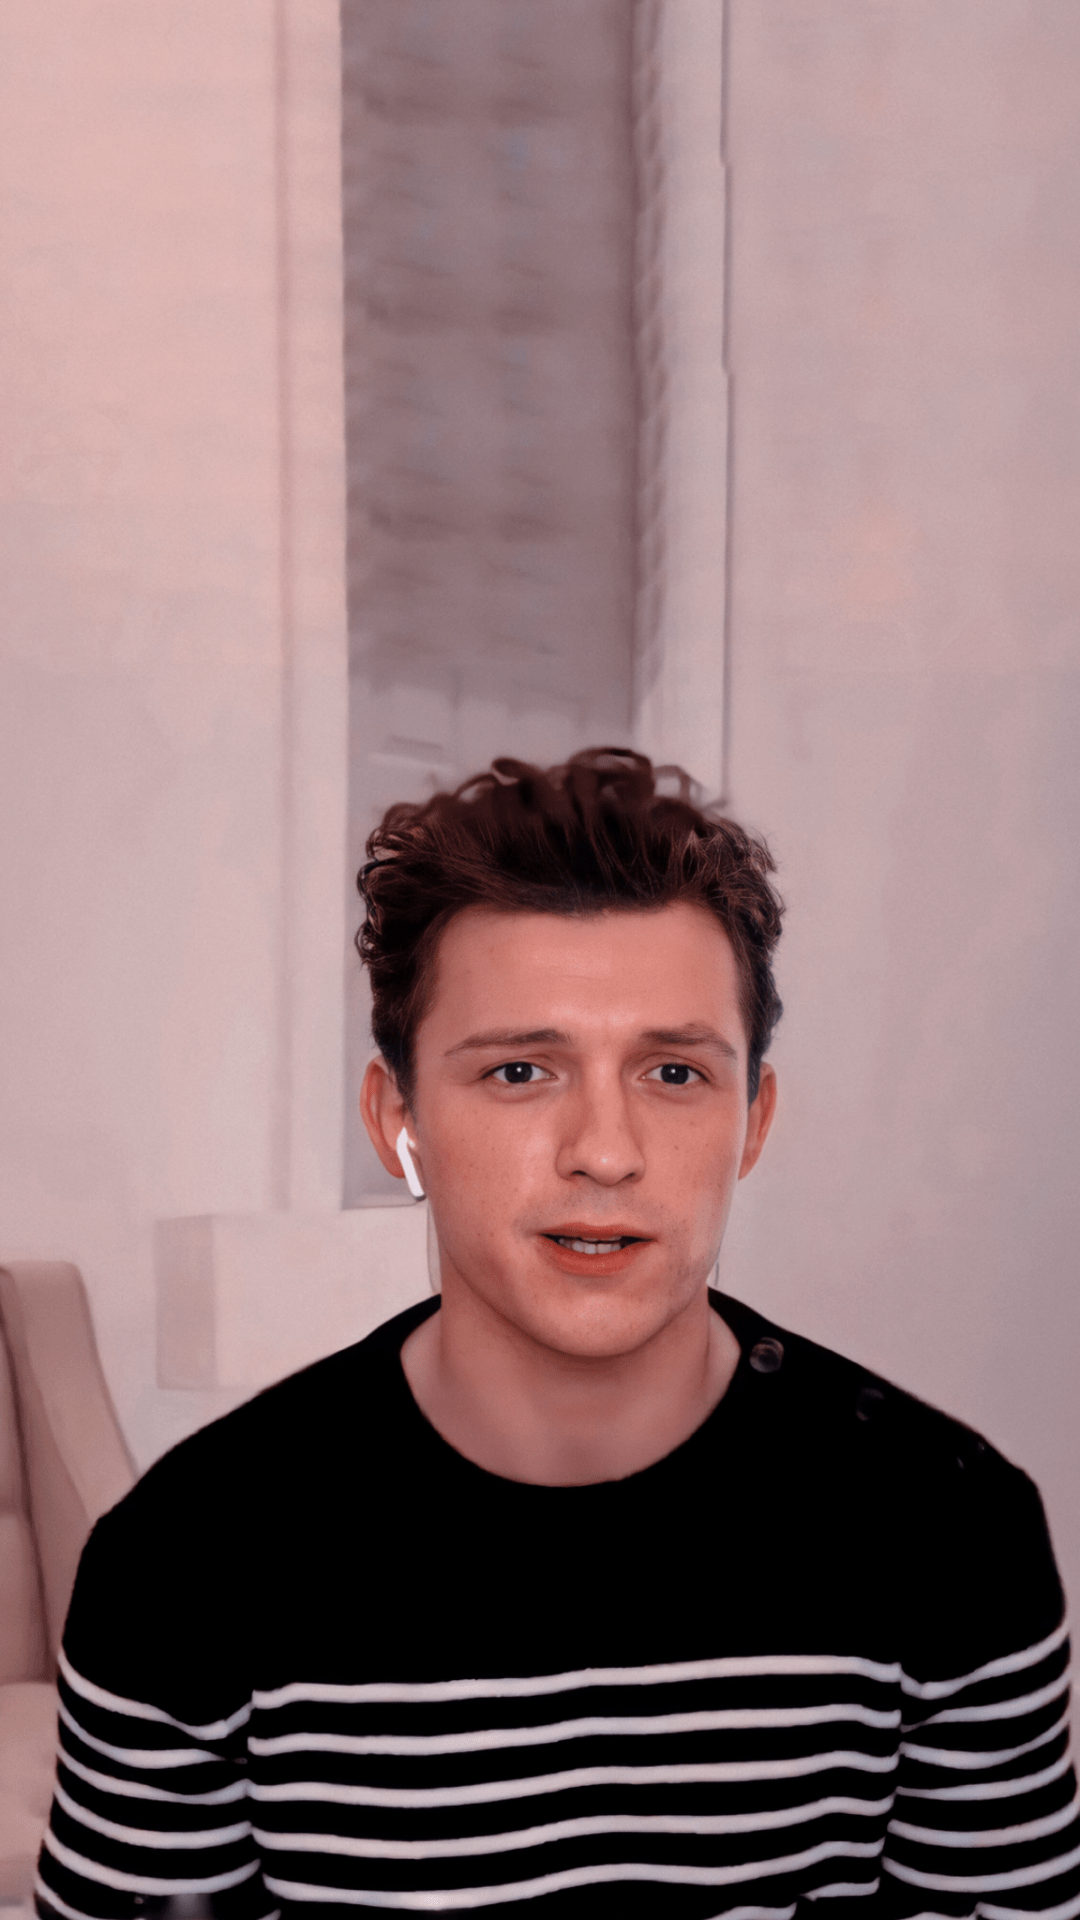 Tom Holland wearing a black and white striped shirt. - Tom Holland